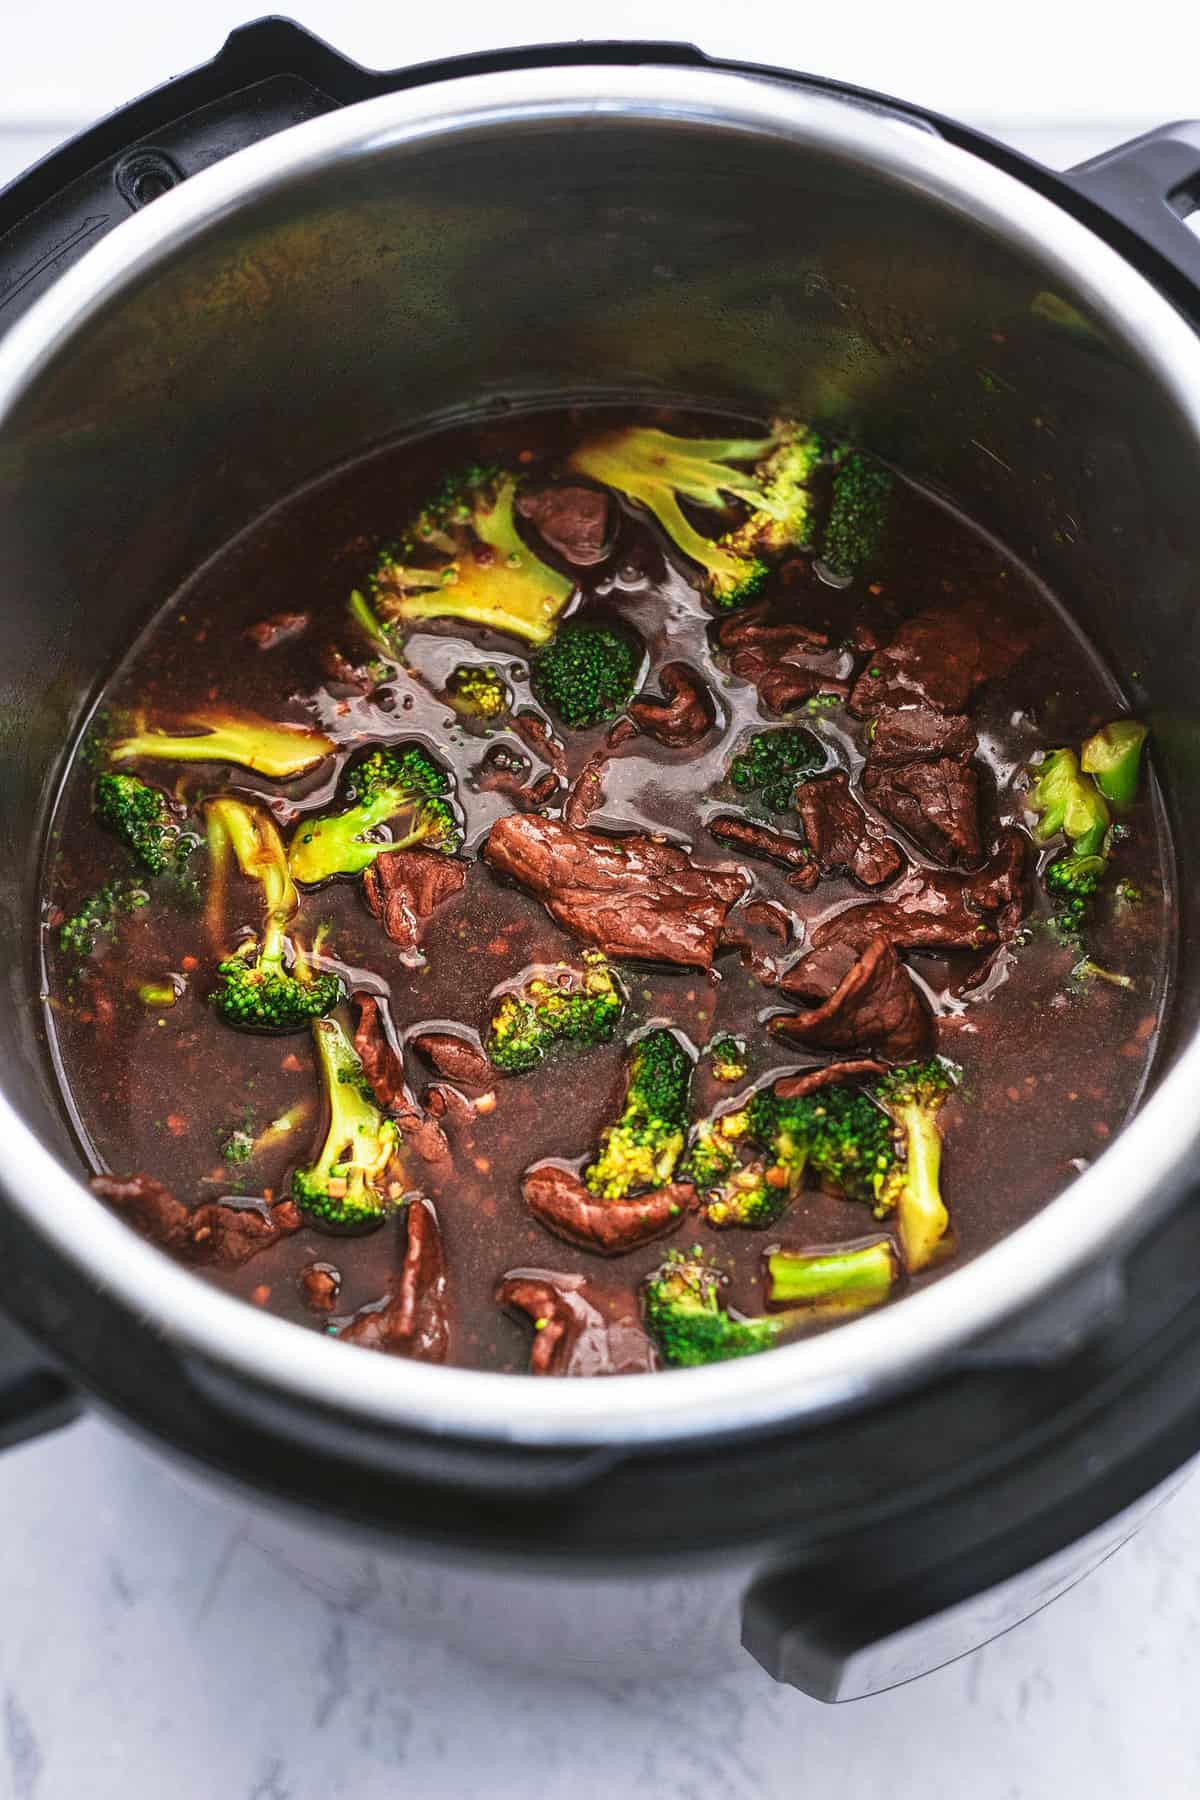 broccoli and beef in pressure cooker.